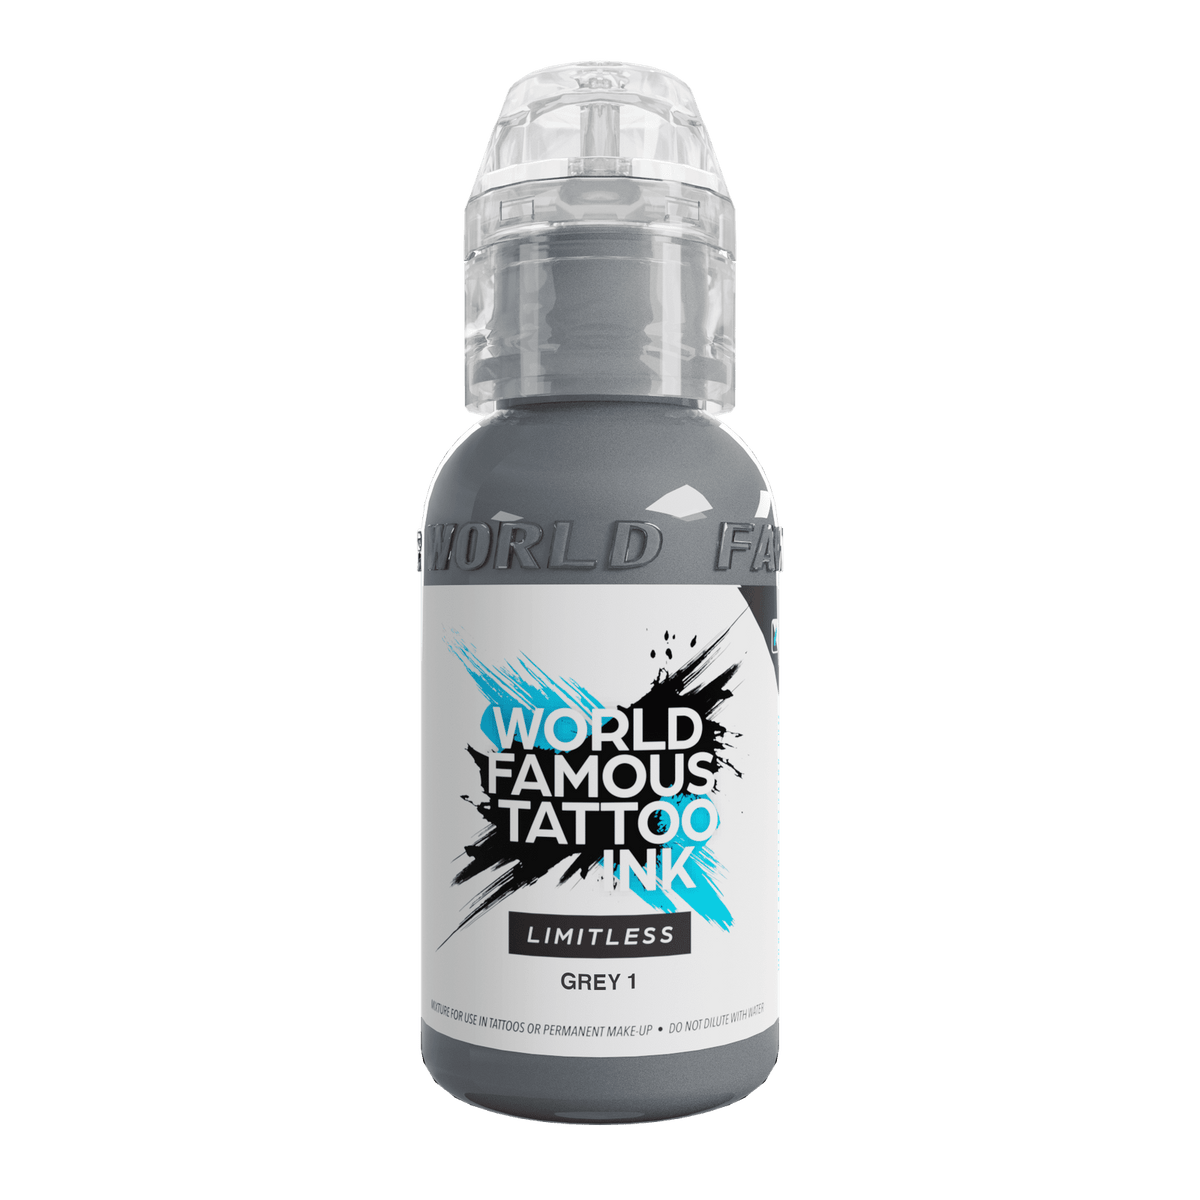 World Famous Tattoo Ink Limitless Gray 1